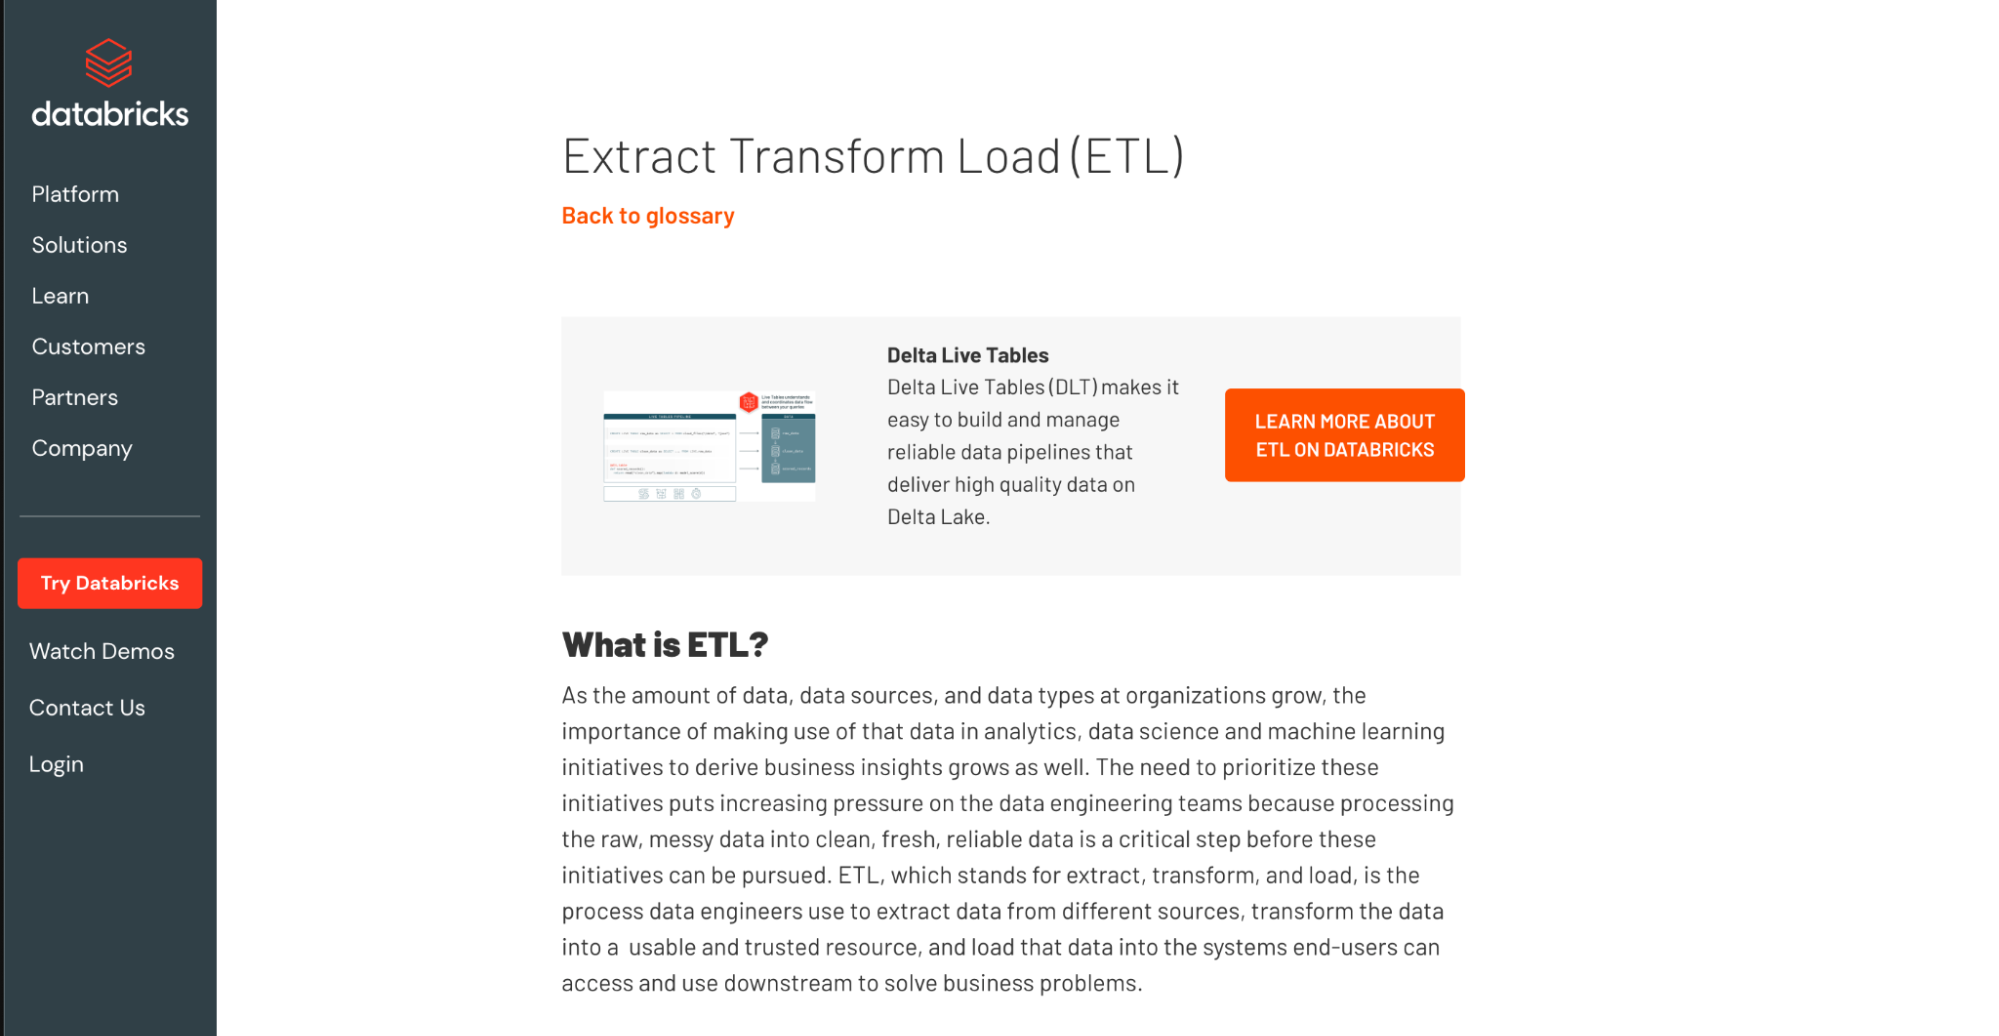 Databricks glossary page for Extract Transform Load (ETL)